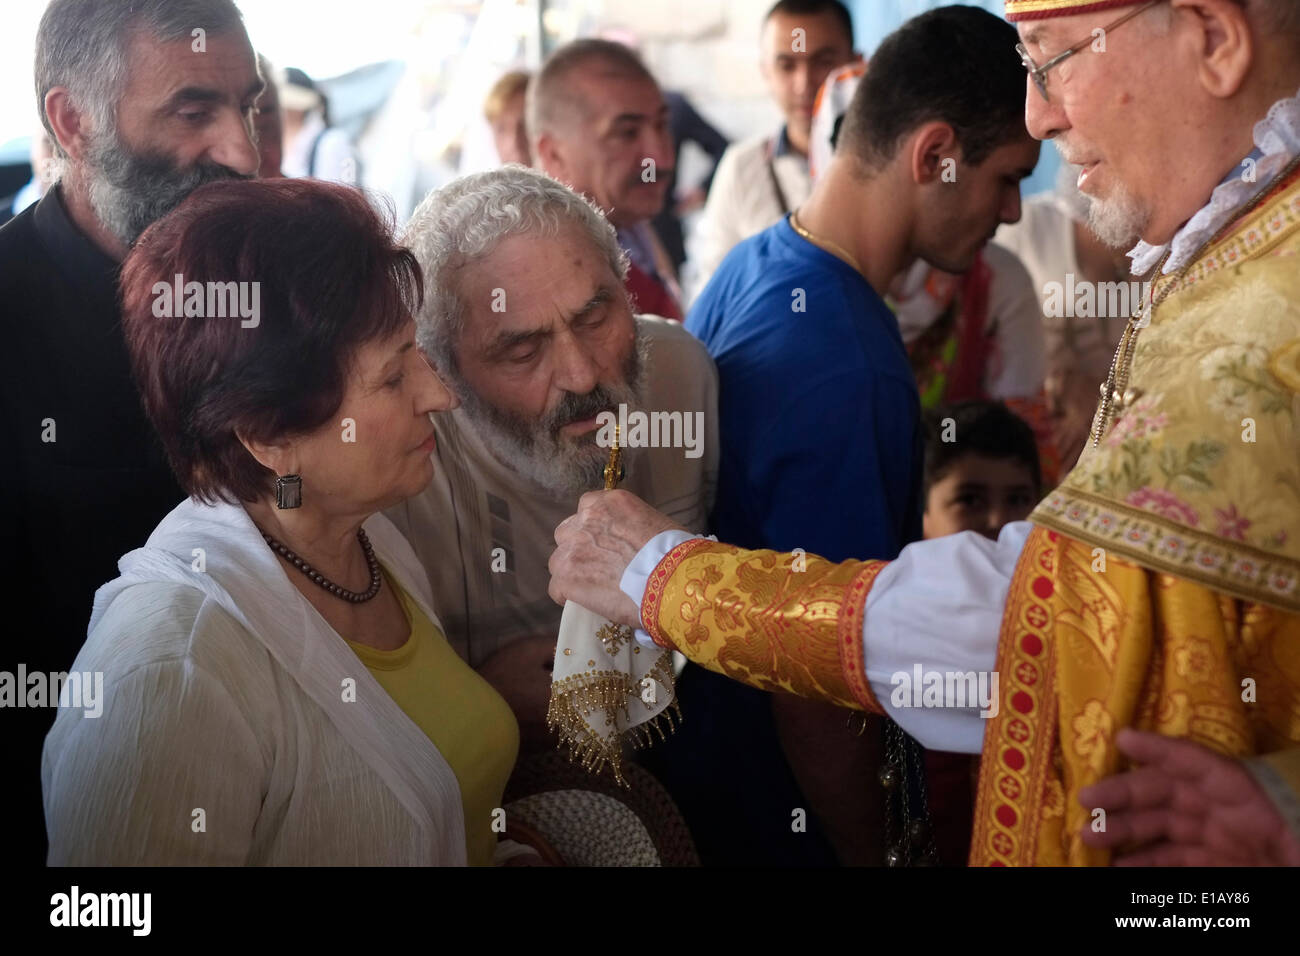 Members of the Armenian community take part in a ceremony at Chapel of the Ascension on the Mount of Olives the site the faithful traditionally believe to be the earthly spot where Jesus ascended into Heaven after his resurrection. East Jerusalem 29 May 2014. Each year on Thursday, the 40th day from Easter Day, Christians all over the world, celebrate the bodily Ascension of Jesus into Heaven. Stock Photo